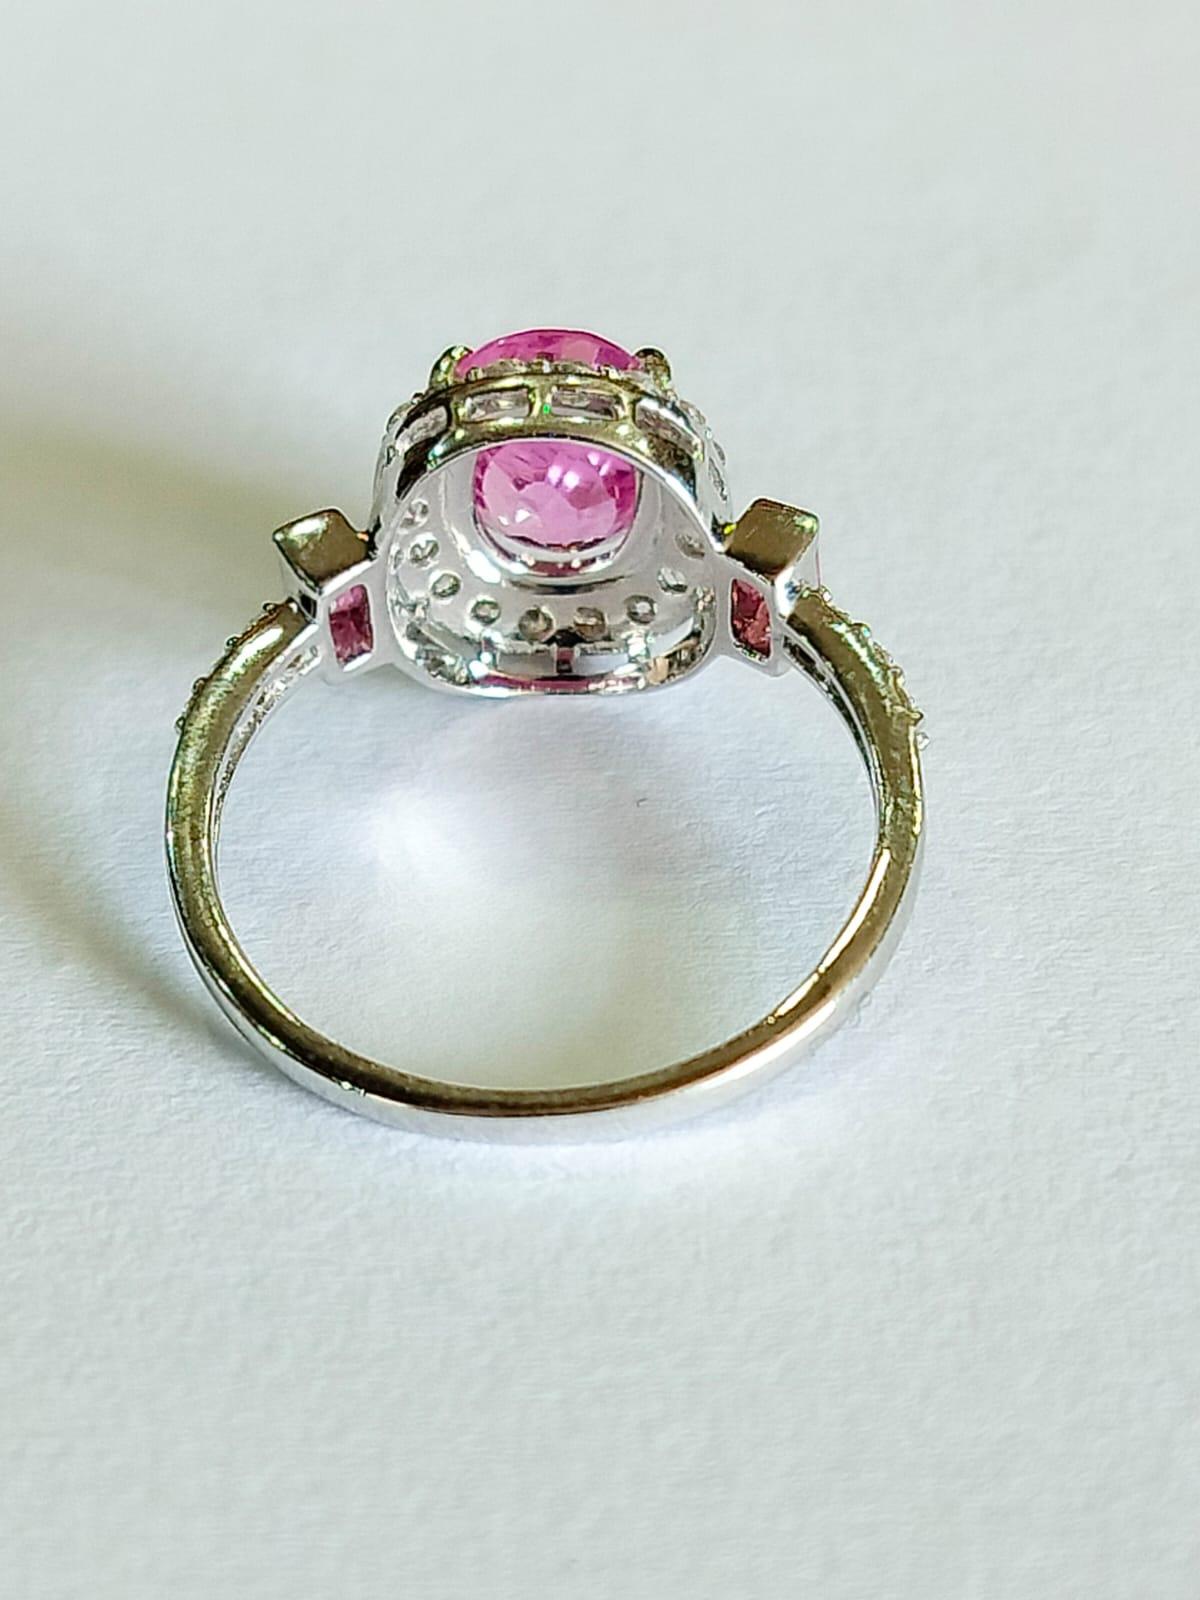 Women's Set in 18K Gold, 2.32 carats, Ceylon Pink Sapphires & Diamonds Engagement Ring  For Sale